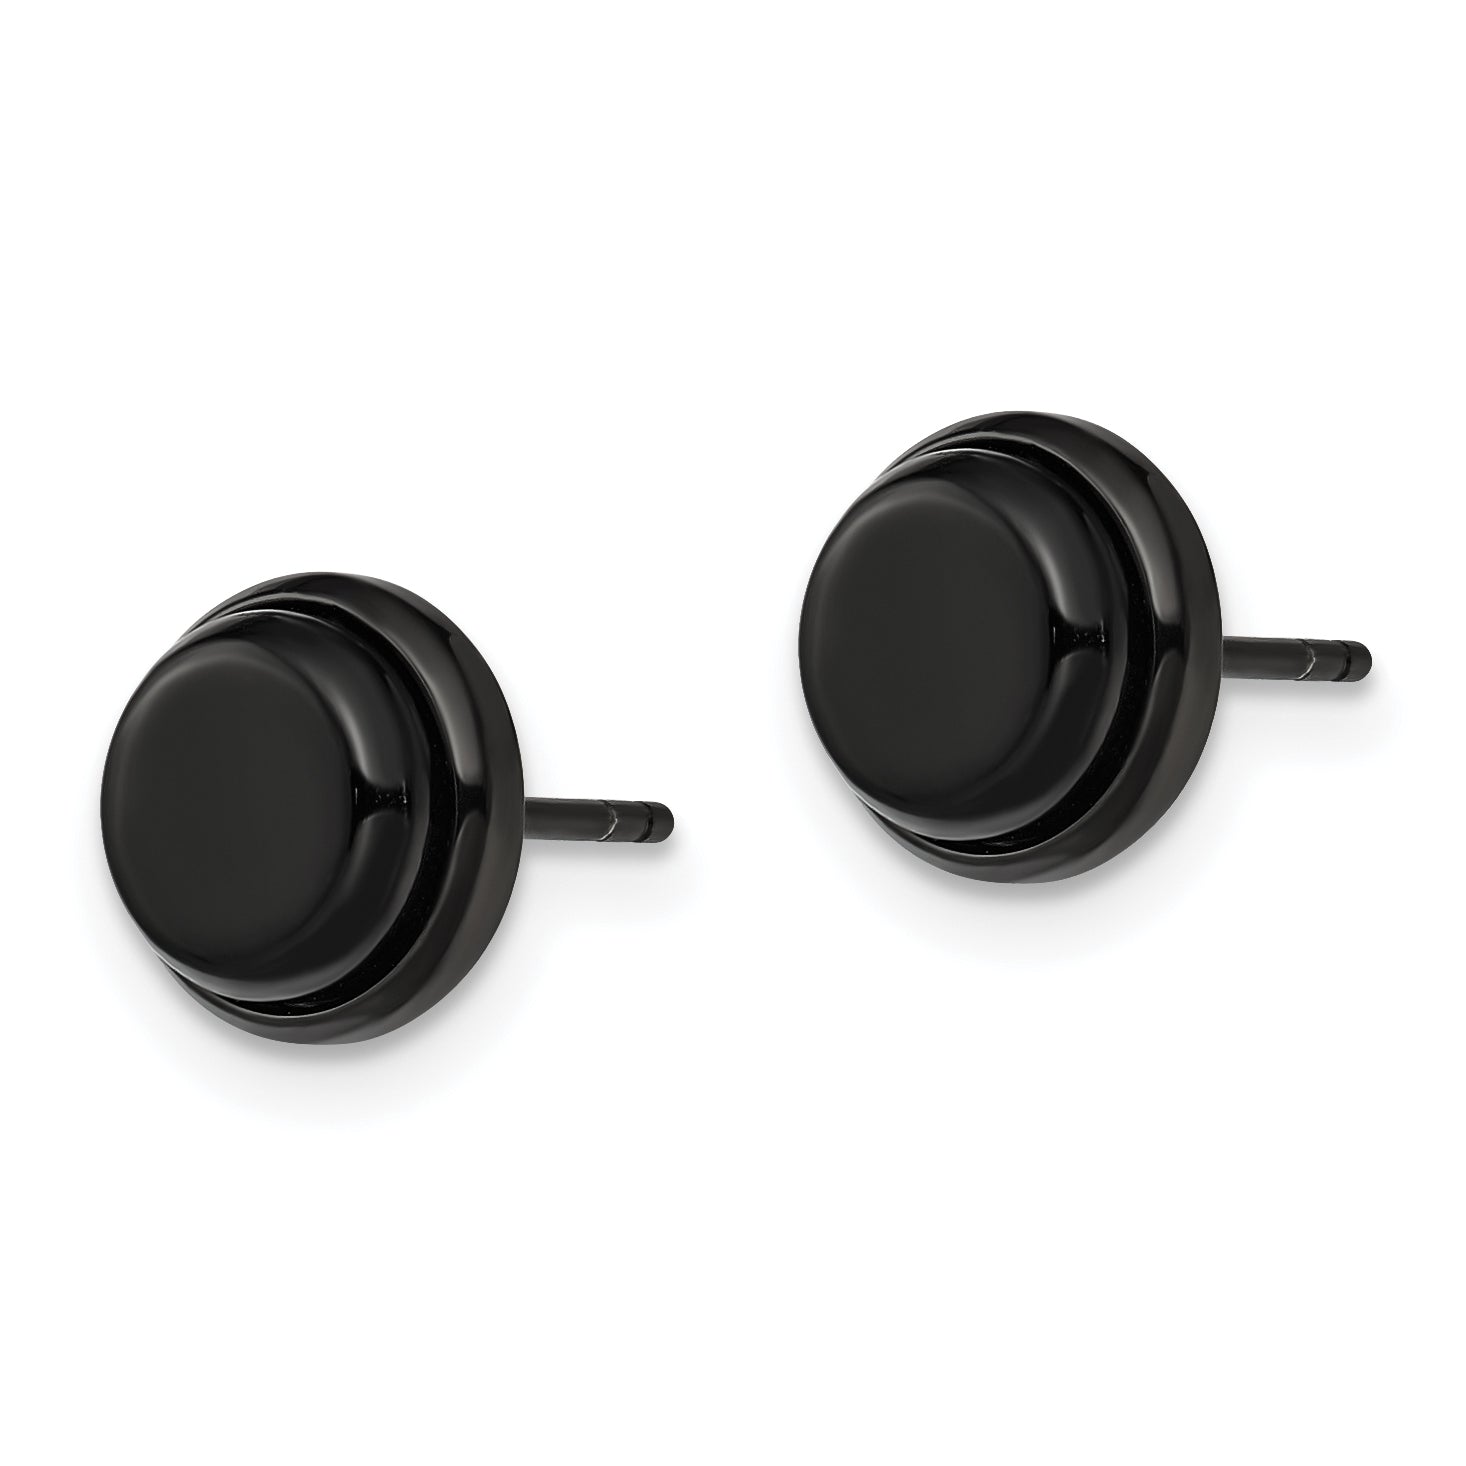 Chisel Stainless Steel Polished Black IP-plated Post Earrings